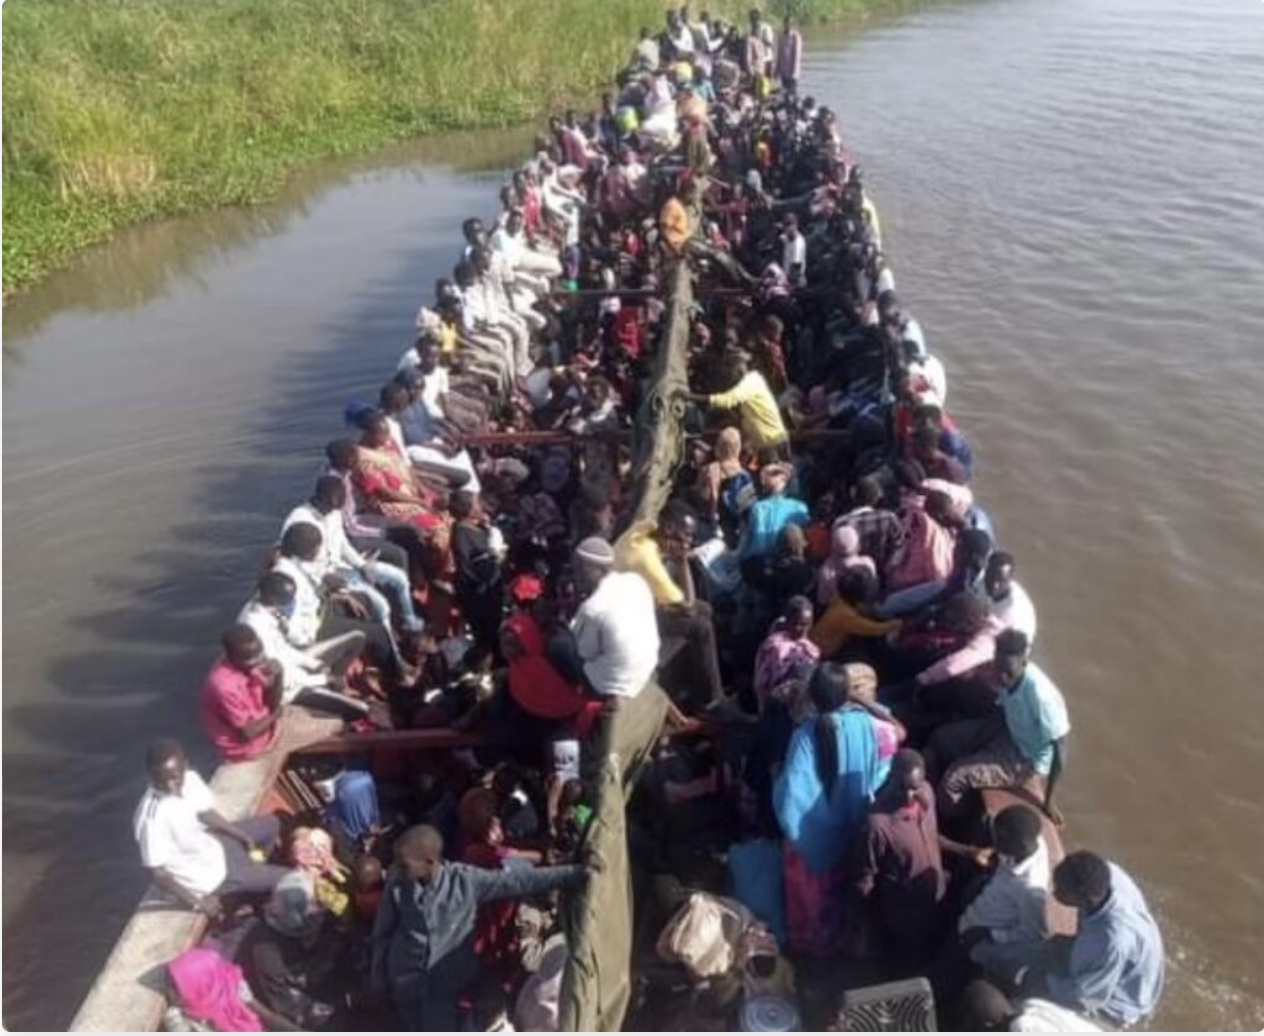 Sudanese Refugees in a boat